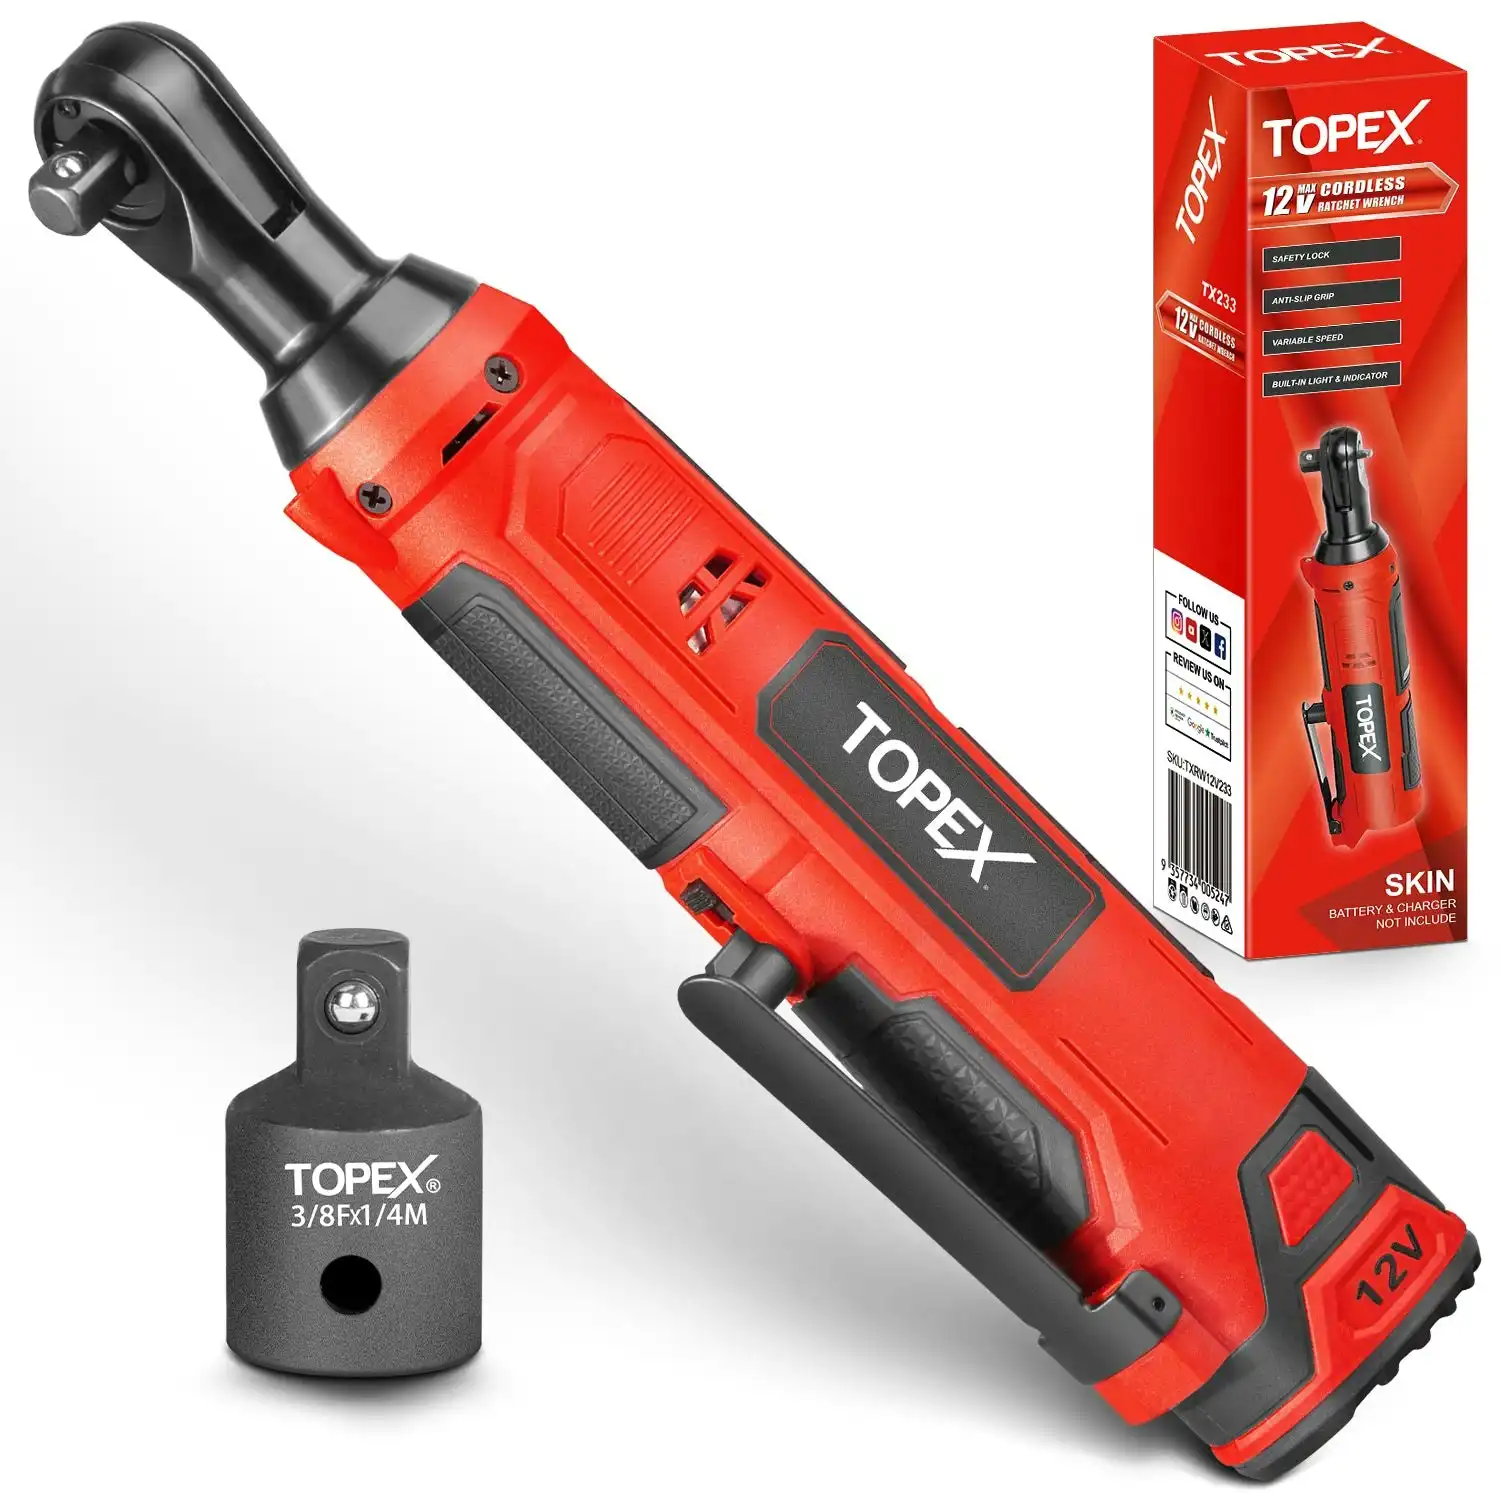 Topex 3/8" 12V Cordless Electric Ratchet Wrench 45NM/33.2ft-lbs 300RPM Variable Speed & LED Light